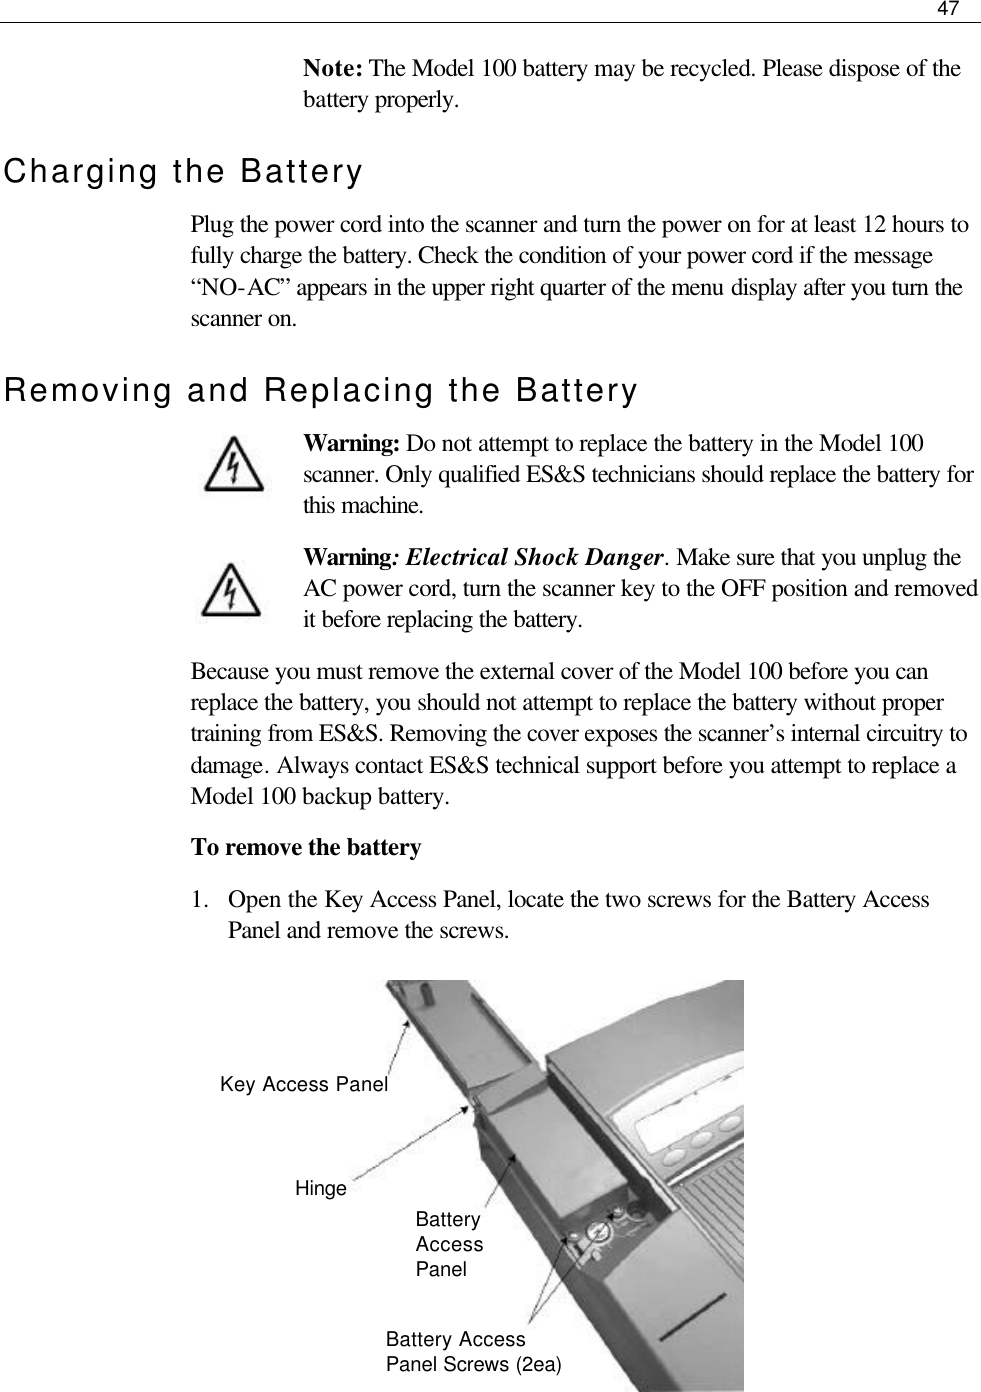     47  Note: The Model 100 battery may be recycled. Please dispose of the battery properly. Charging the Battery Plug the power cord into the scanner and turn the power on for at least 12 hours to fully charge the battery. Check the condition of your power cord if the message “NO-AC” appears in the upper right quarter of the menu display after you turn the scanner on. Removing and Replacing the Battery Warning: Do not attempt to replace the battery in the Model 100 scanner. Only qualified ES&amp;S technicians should replace the battery for this machine. Warning: Electrical Shock Danger. Make sure that you unplug the AC power cord, turn the scanner key to the OFF position and removed it before replacing the battery. Because you must remove the external cover of the Model 100 before you can replace the battery, you should not attempt to replace the battery without proper training from ES&amp;S. Removing the cover exposes the scanner’s internal circuitry to damage. Always contact ES&amp;S technical support before you attempt to replace a Model 100 backup battery. To remove the battery 1.  Open the Key Access Panel, locate the two screws for the Battery Access Panel and remove the screws.           Key Access Panel Hinge Battery Access Panel Battery Access Panel Screws (2ea)   